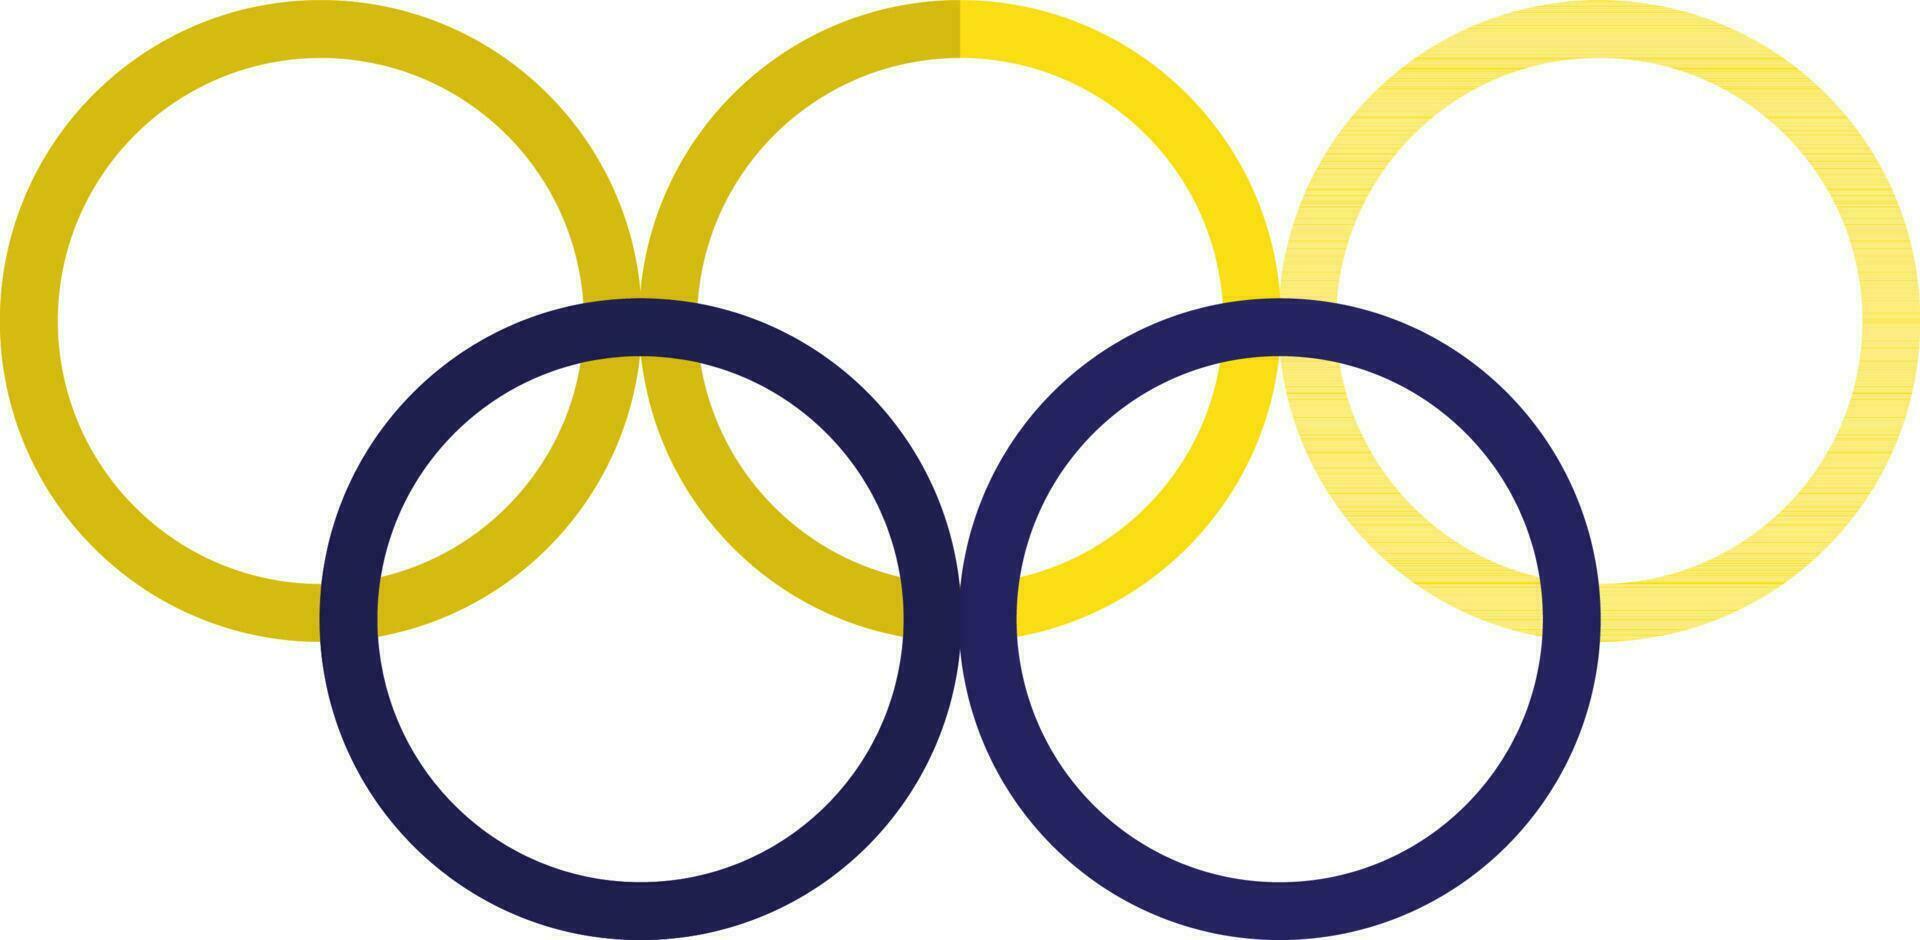 Blue and yellow olympic rings. vector